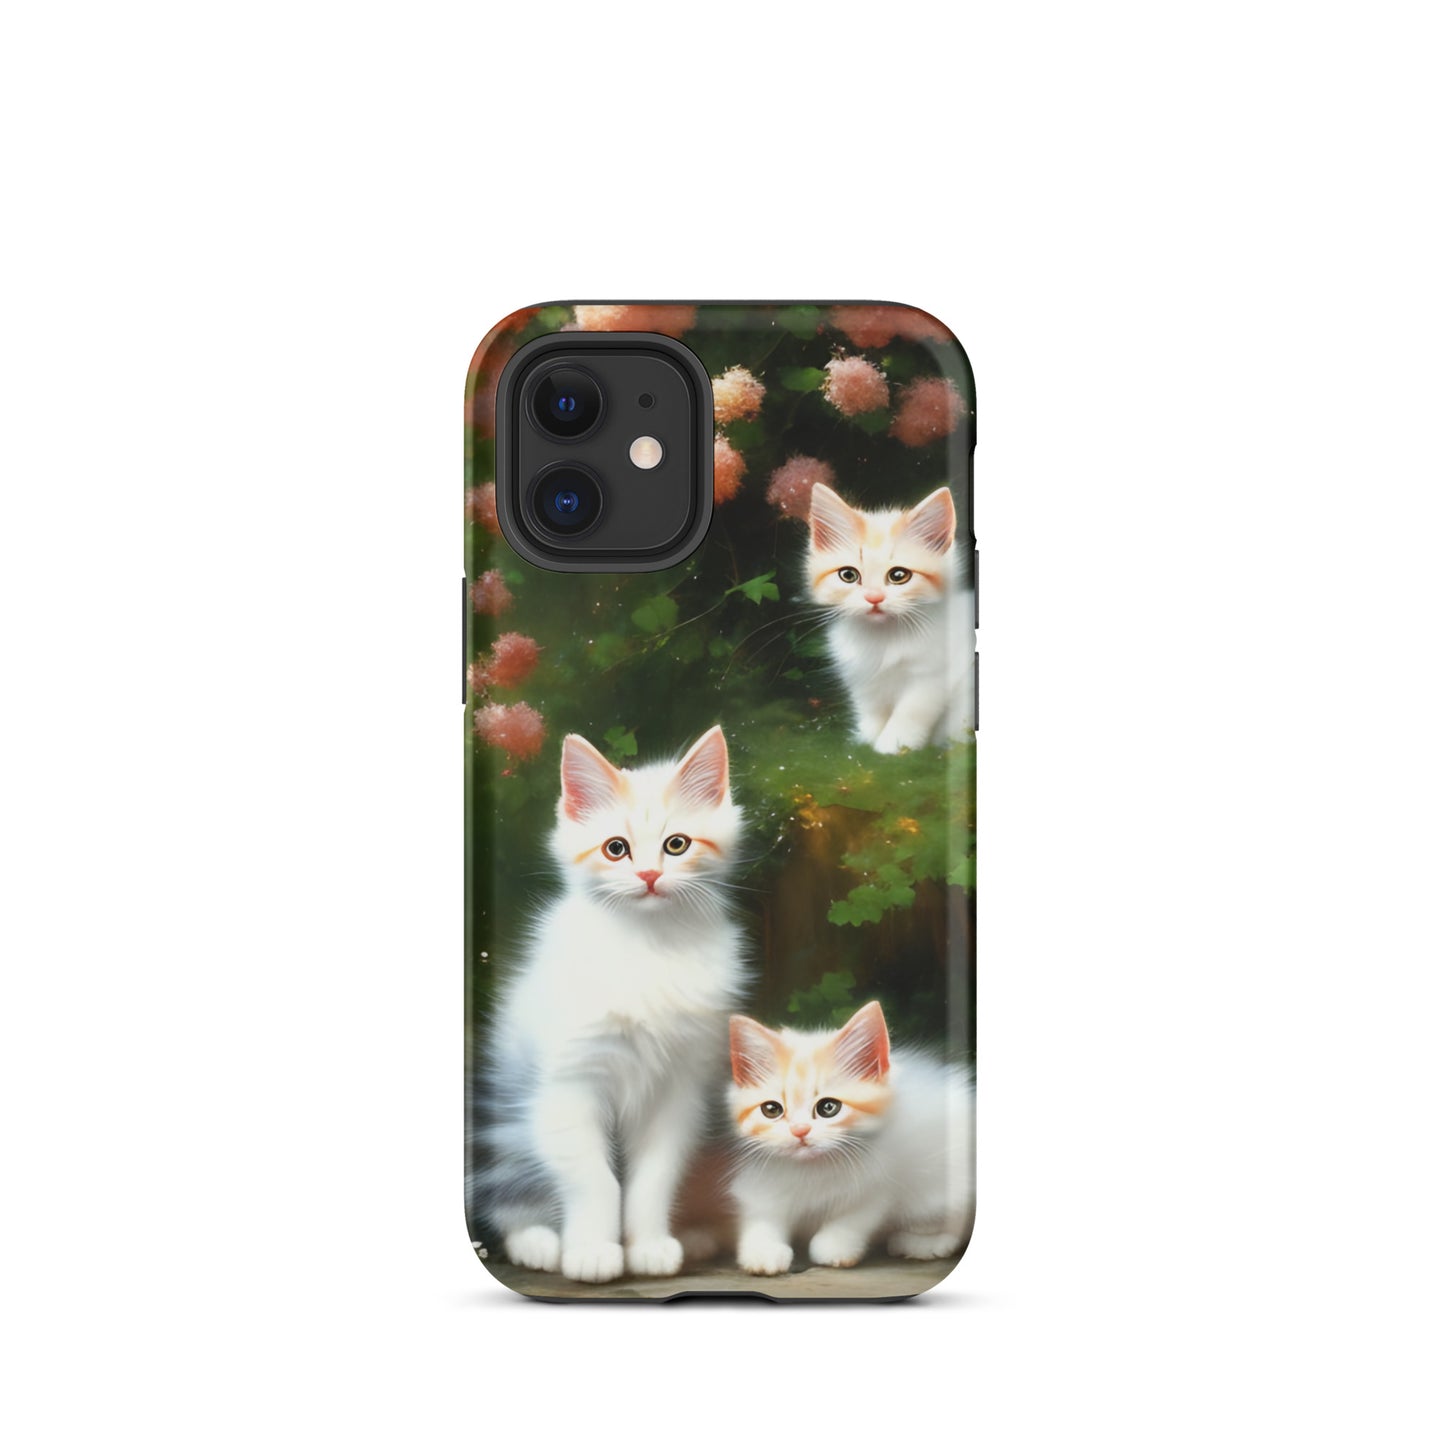 A picture of a iphone tough case with 3 fluffy white and orange kittens and peach colored flowers in the background - matte-iphone-12-mini-front